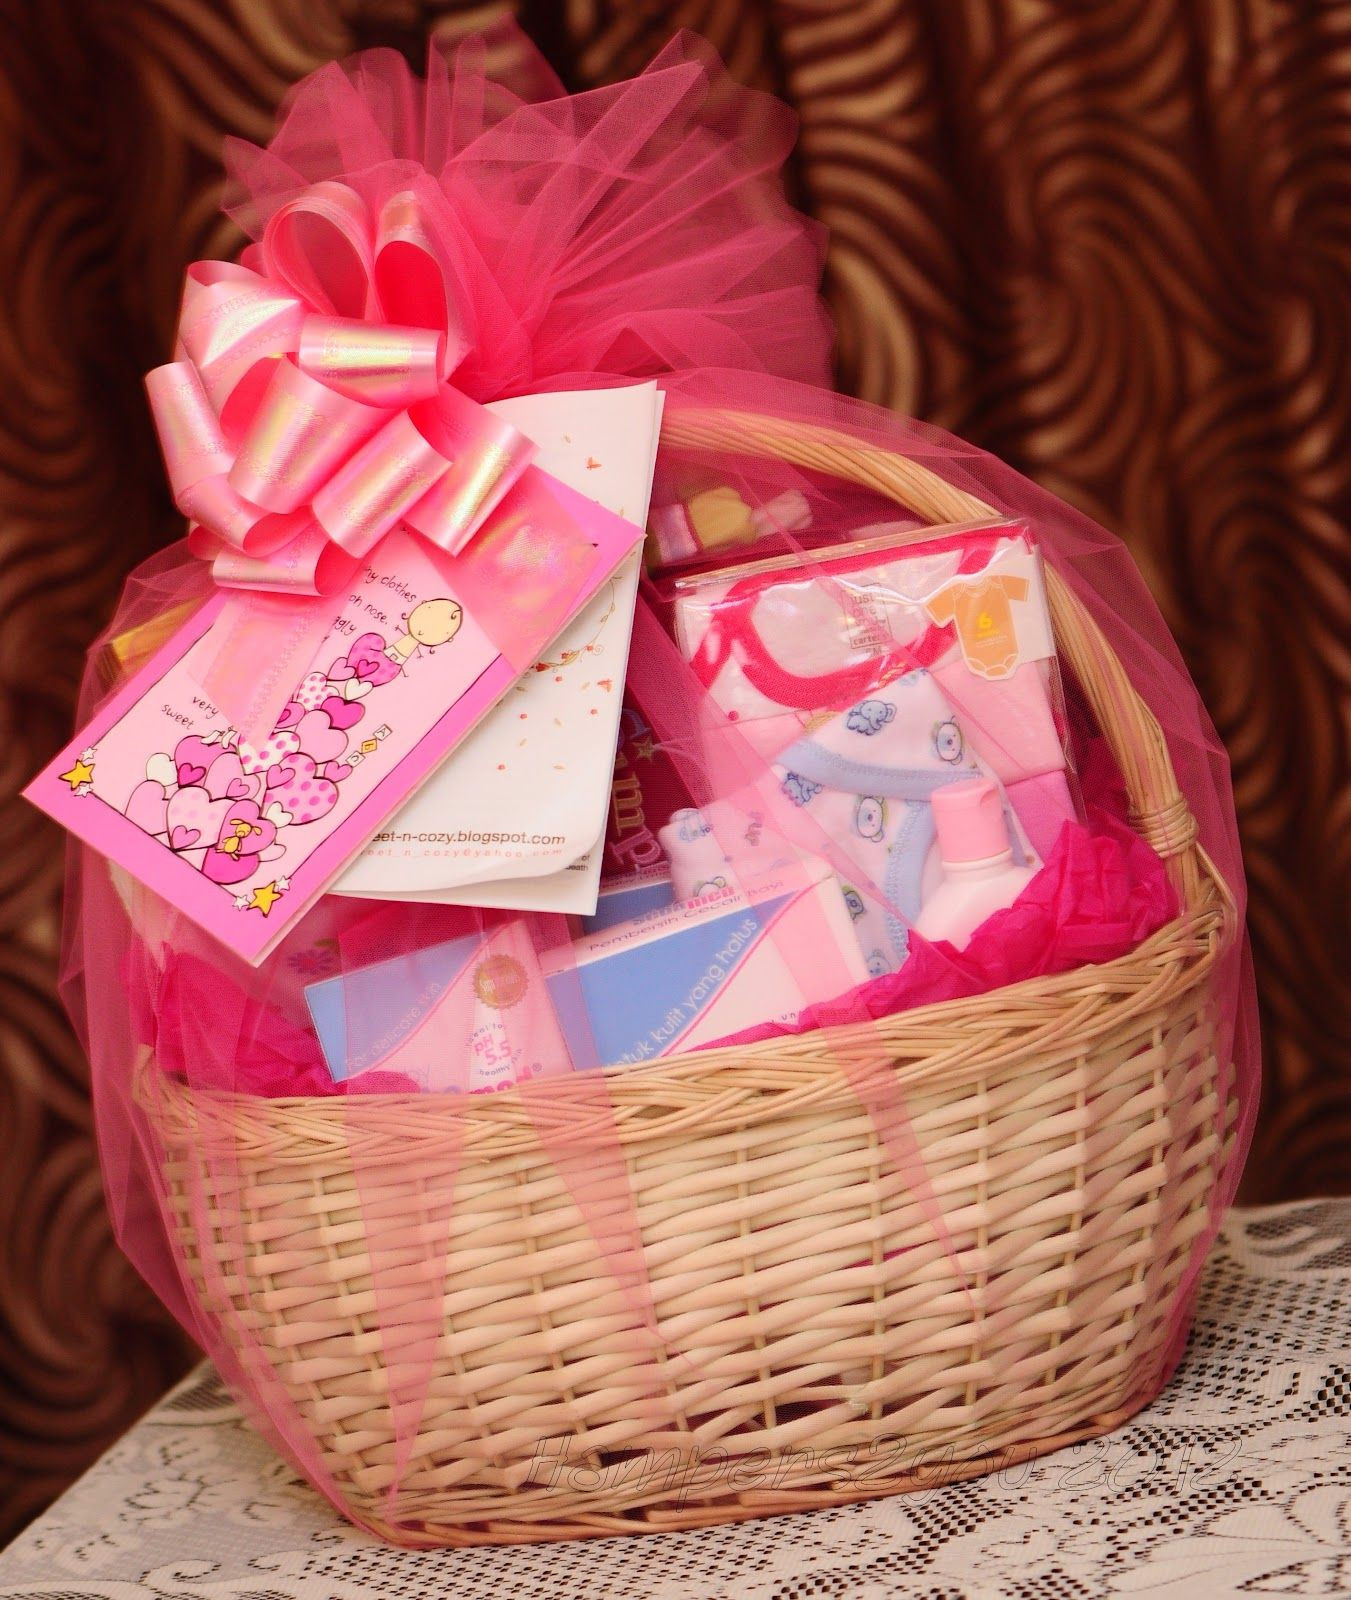 Born Baby Gift Ideas
 Baby Gift Baskets